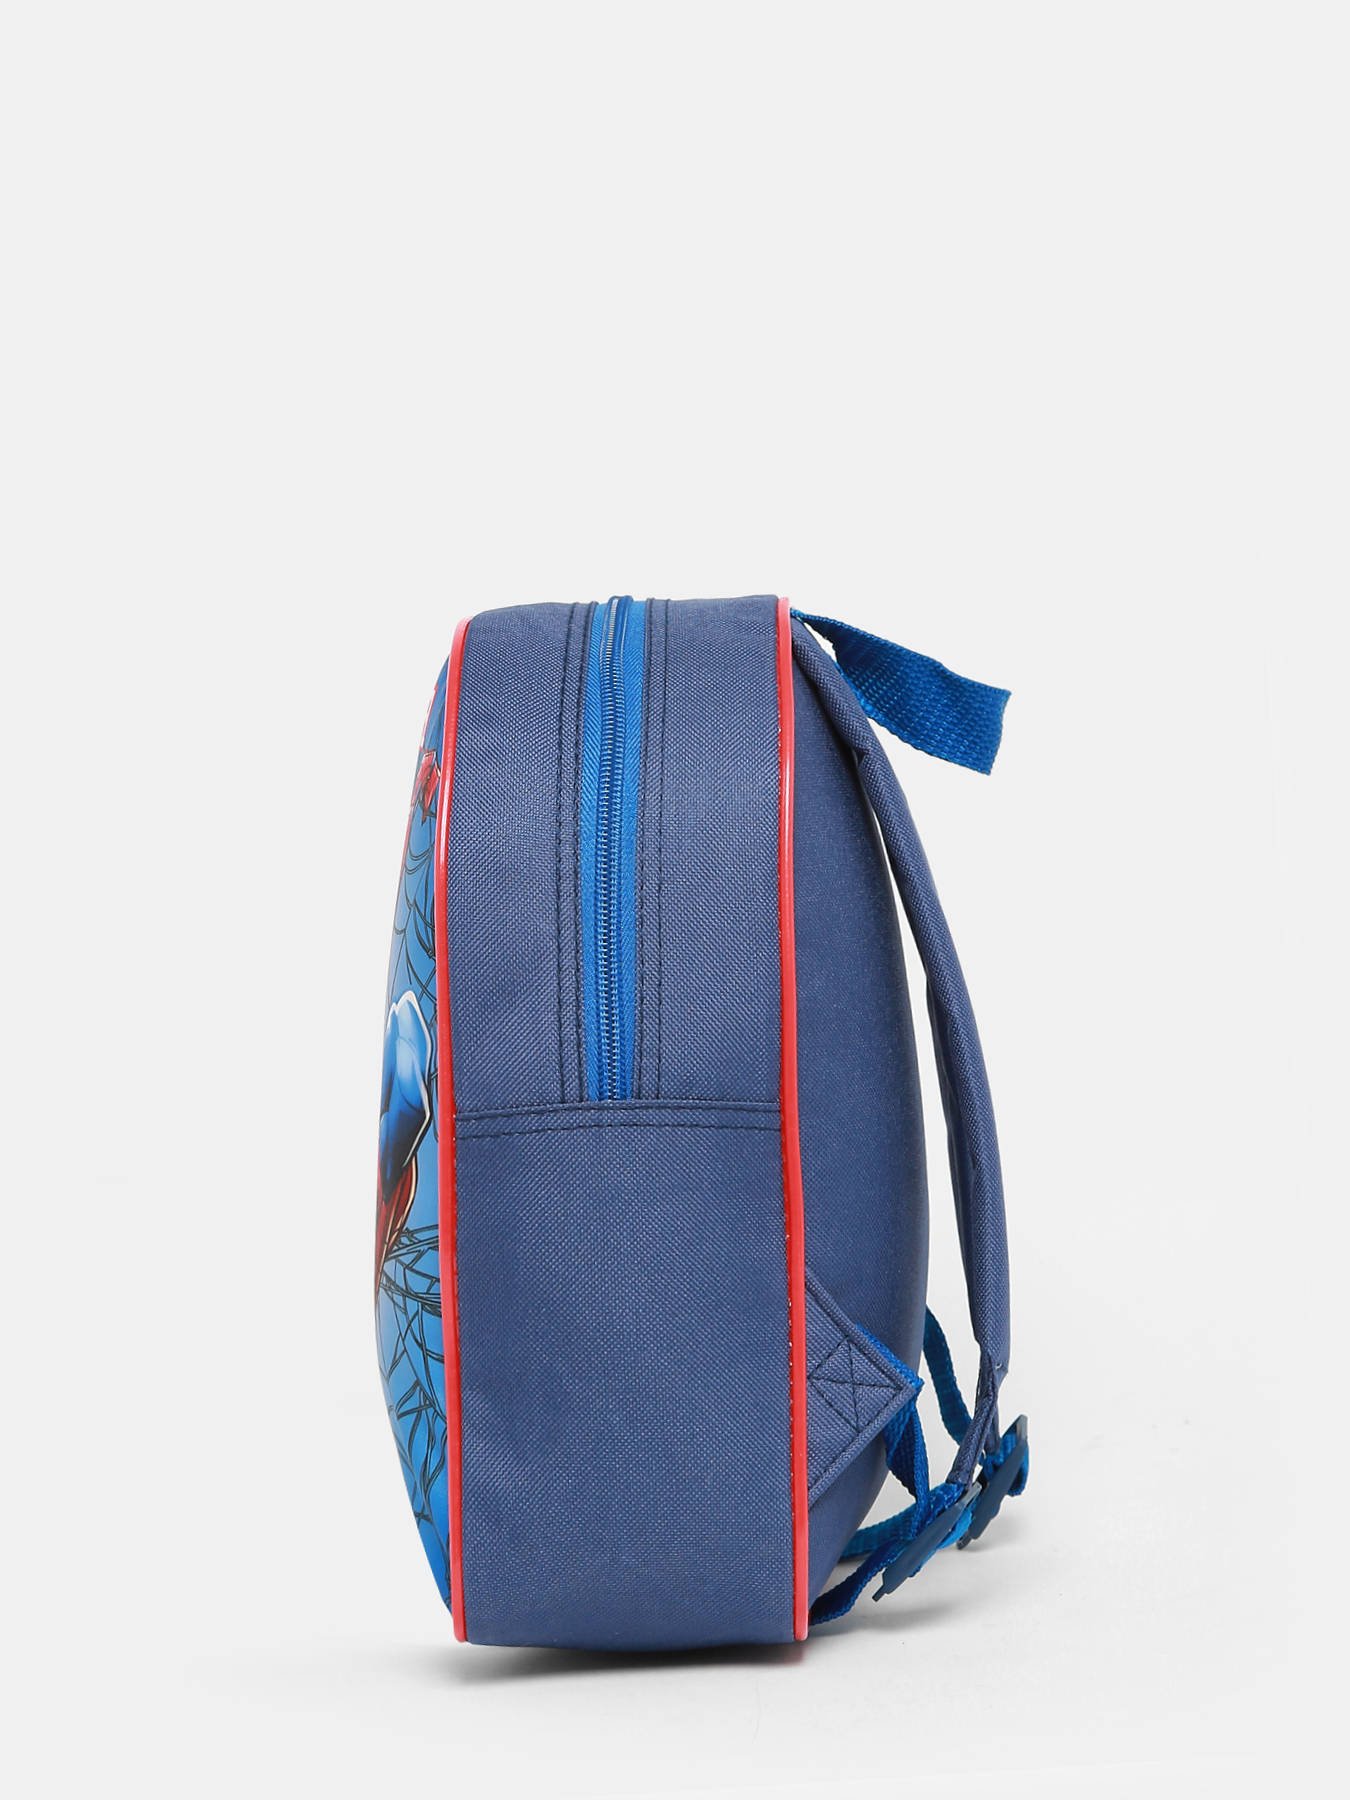 Spider Man Backpack 200-3361 - best prices